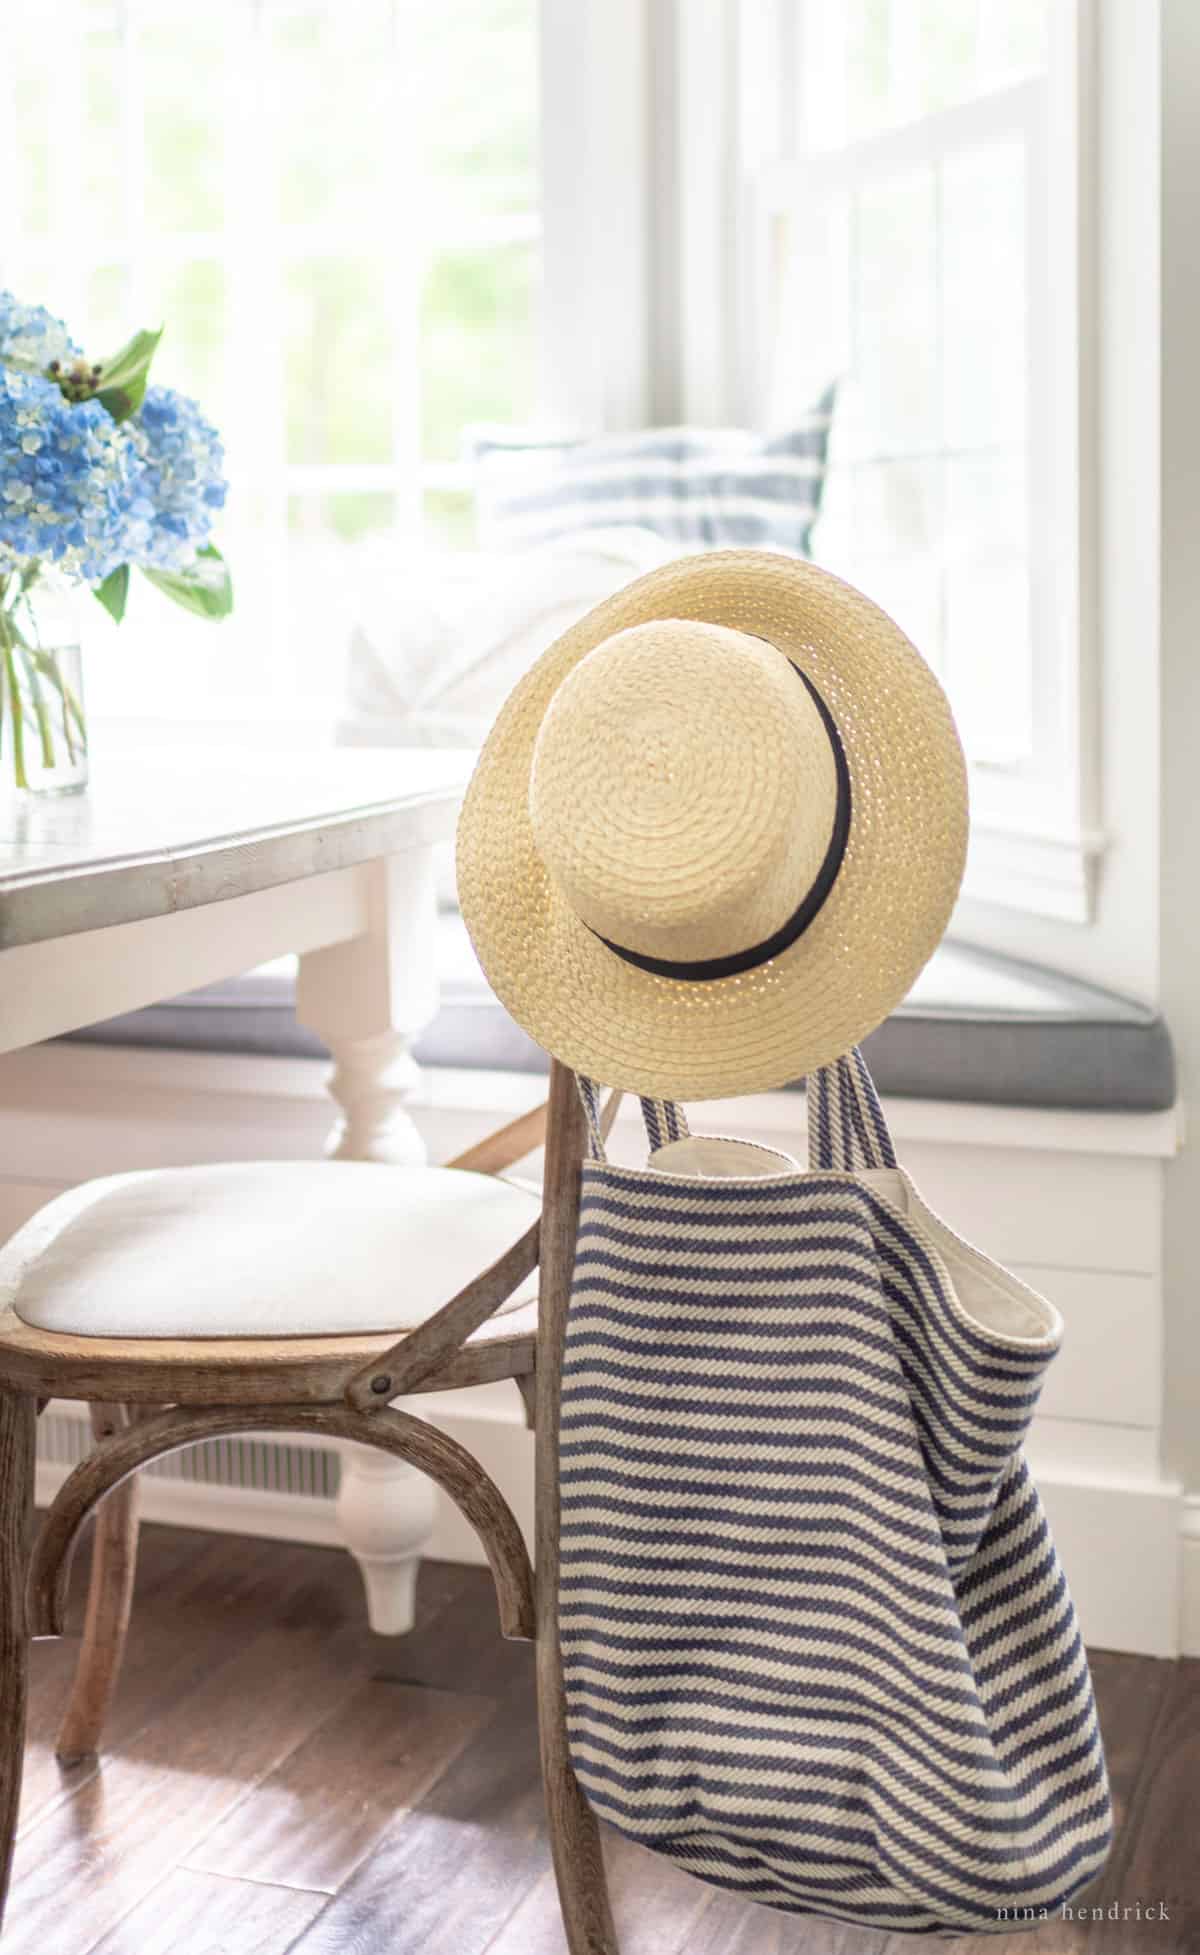 Beachy blue striped bag in a coastal dining room with a straw hat